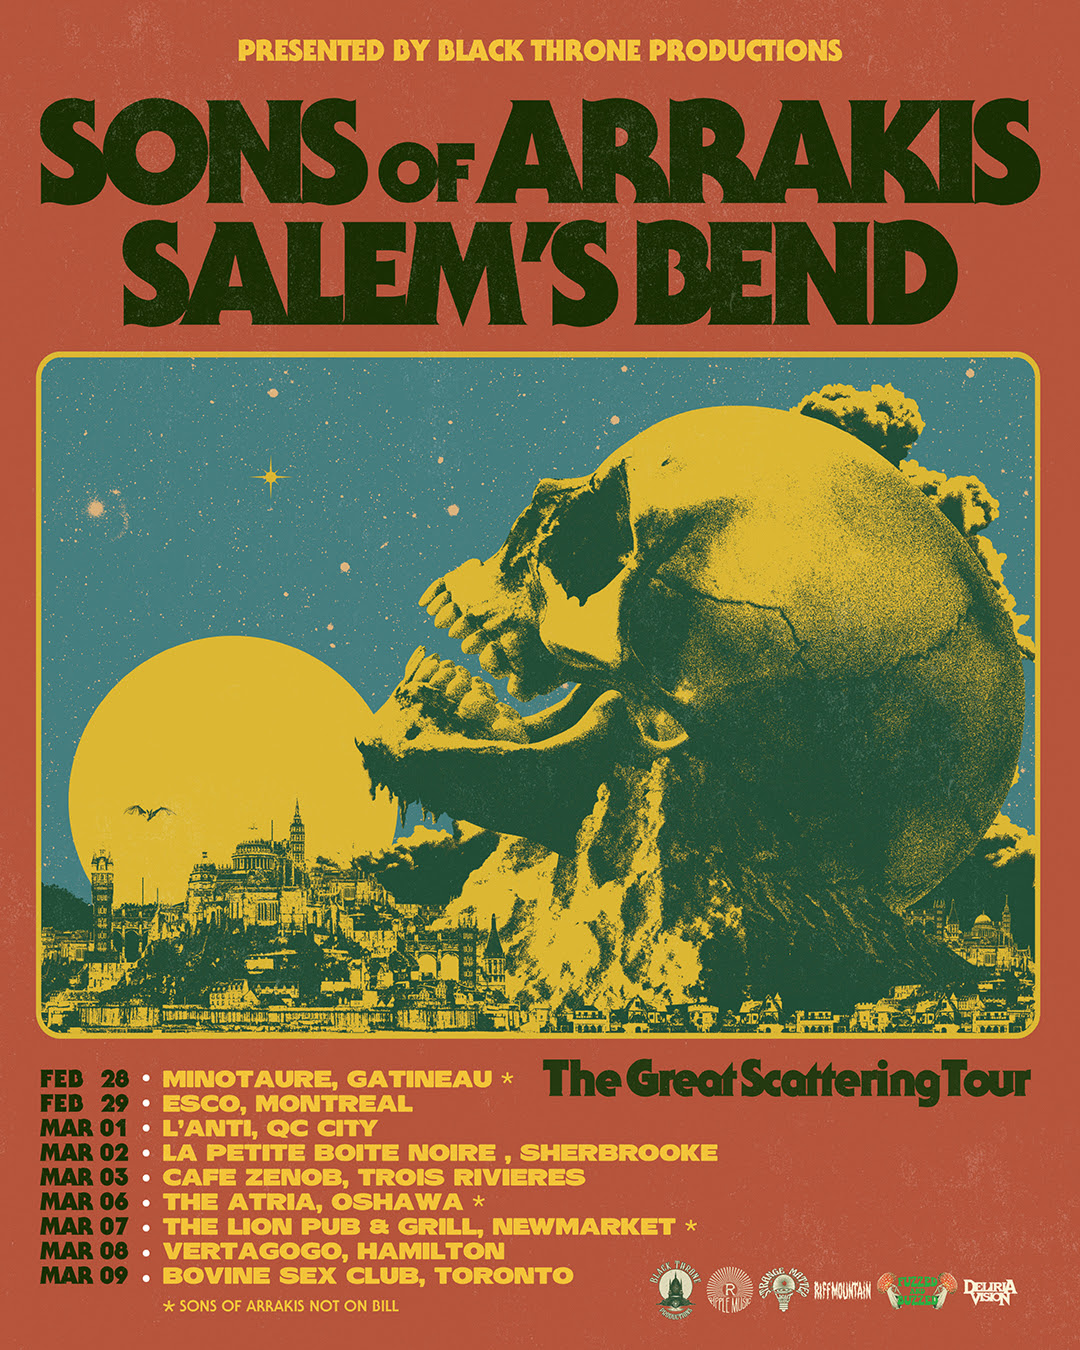 Black Throne Productions Presents “The Great Scattering Tour” with Salem’s Bend and Son of Arrakis